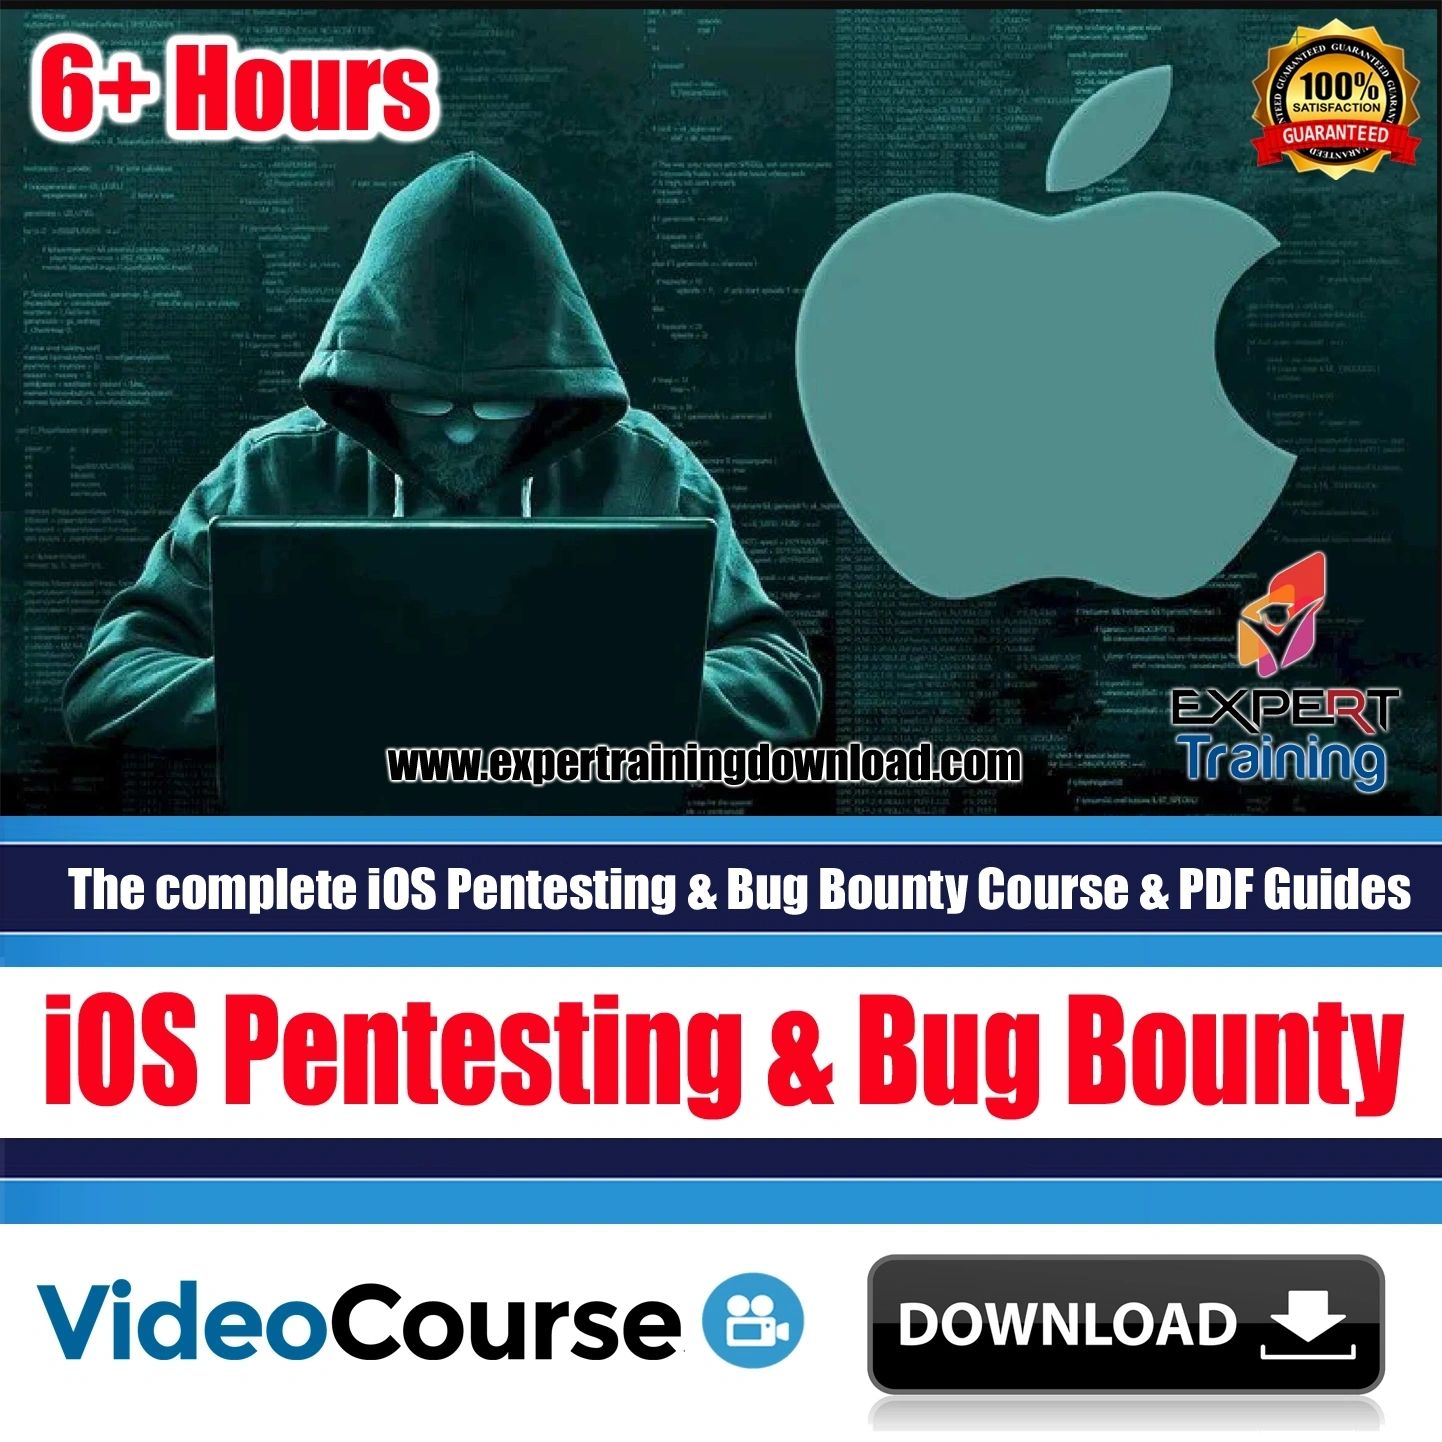 The complete iOS Pentesting & Bug Bounty Course & PDF Guides